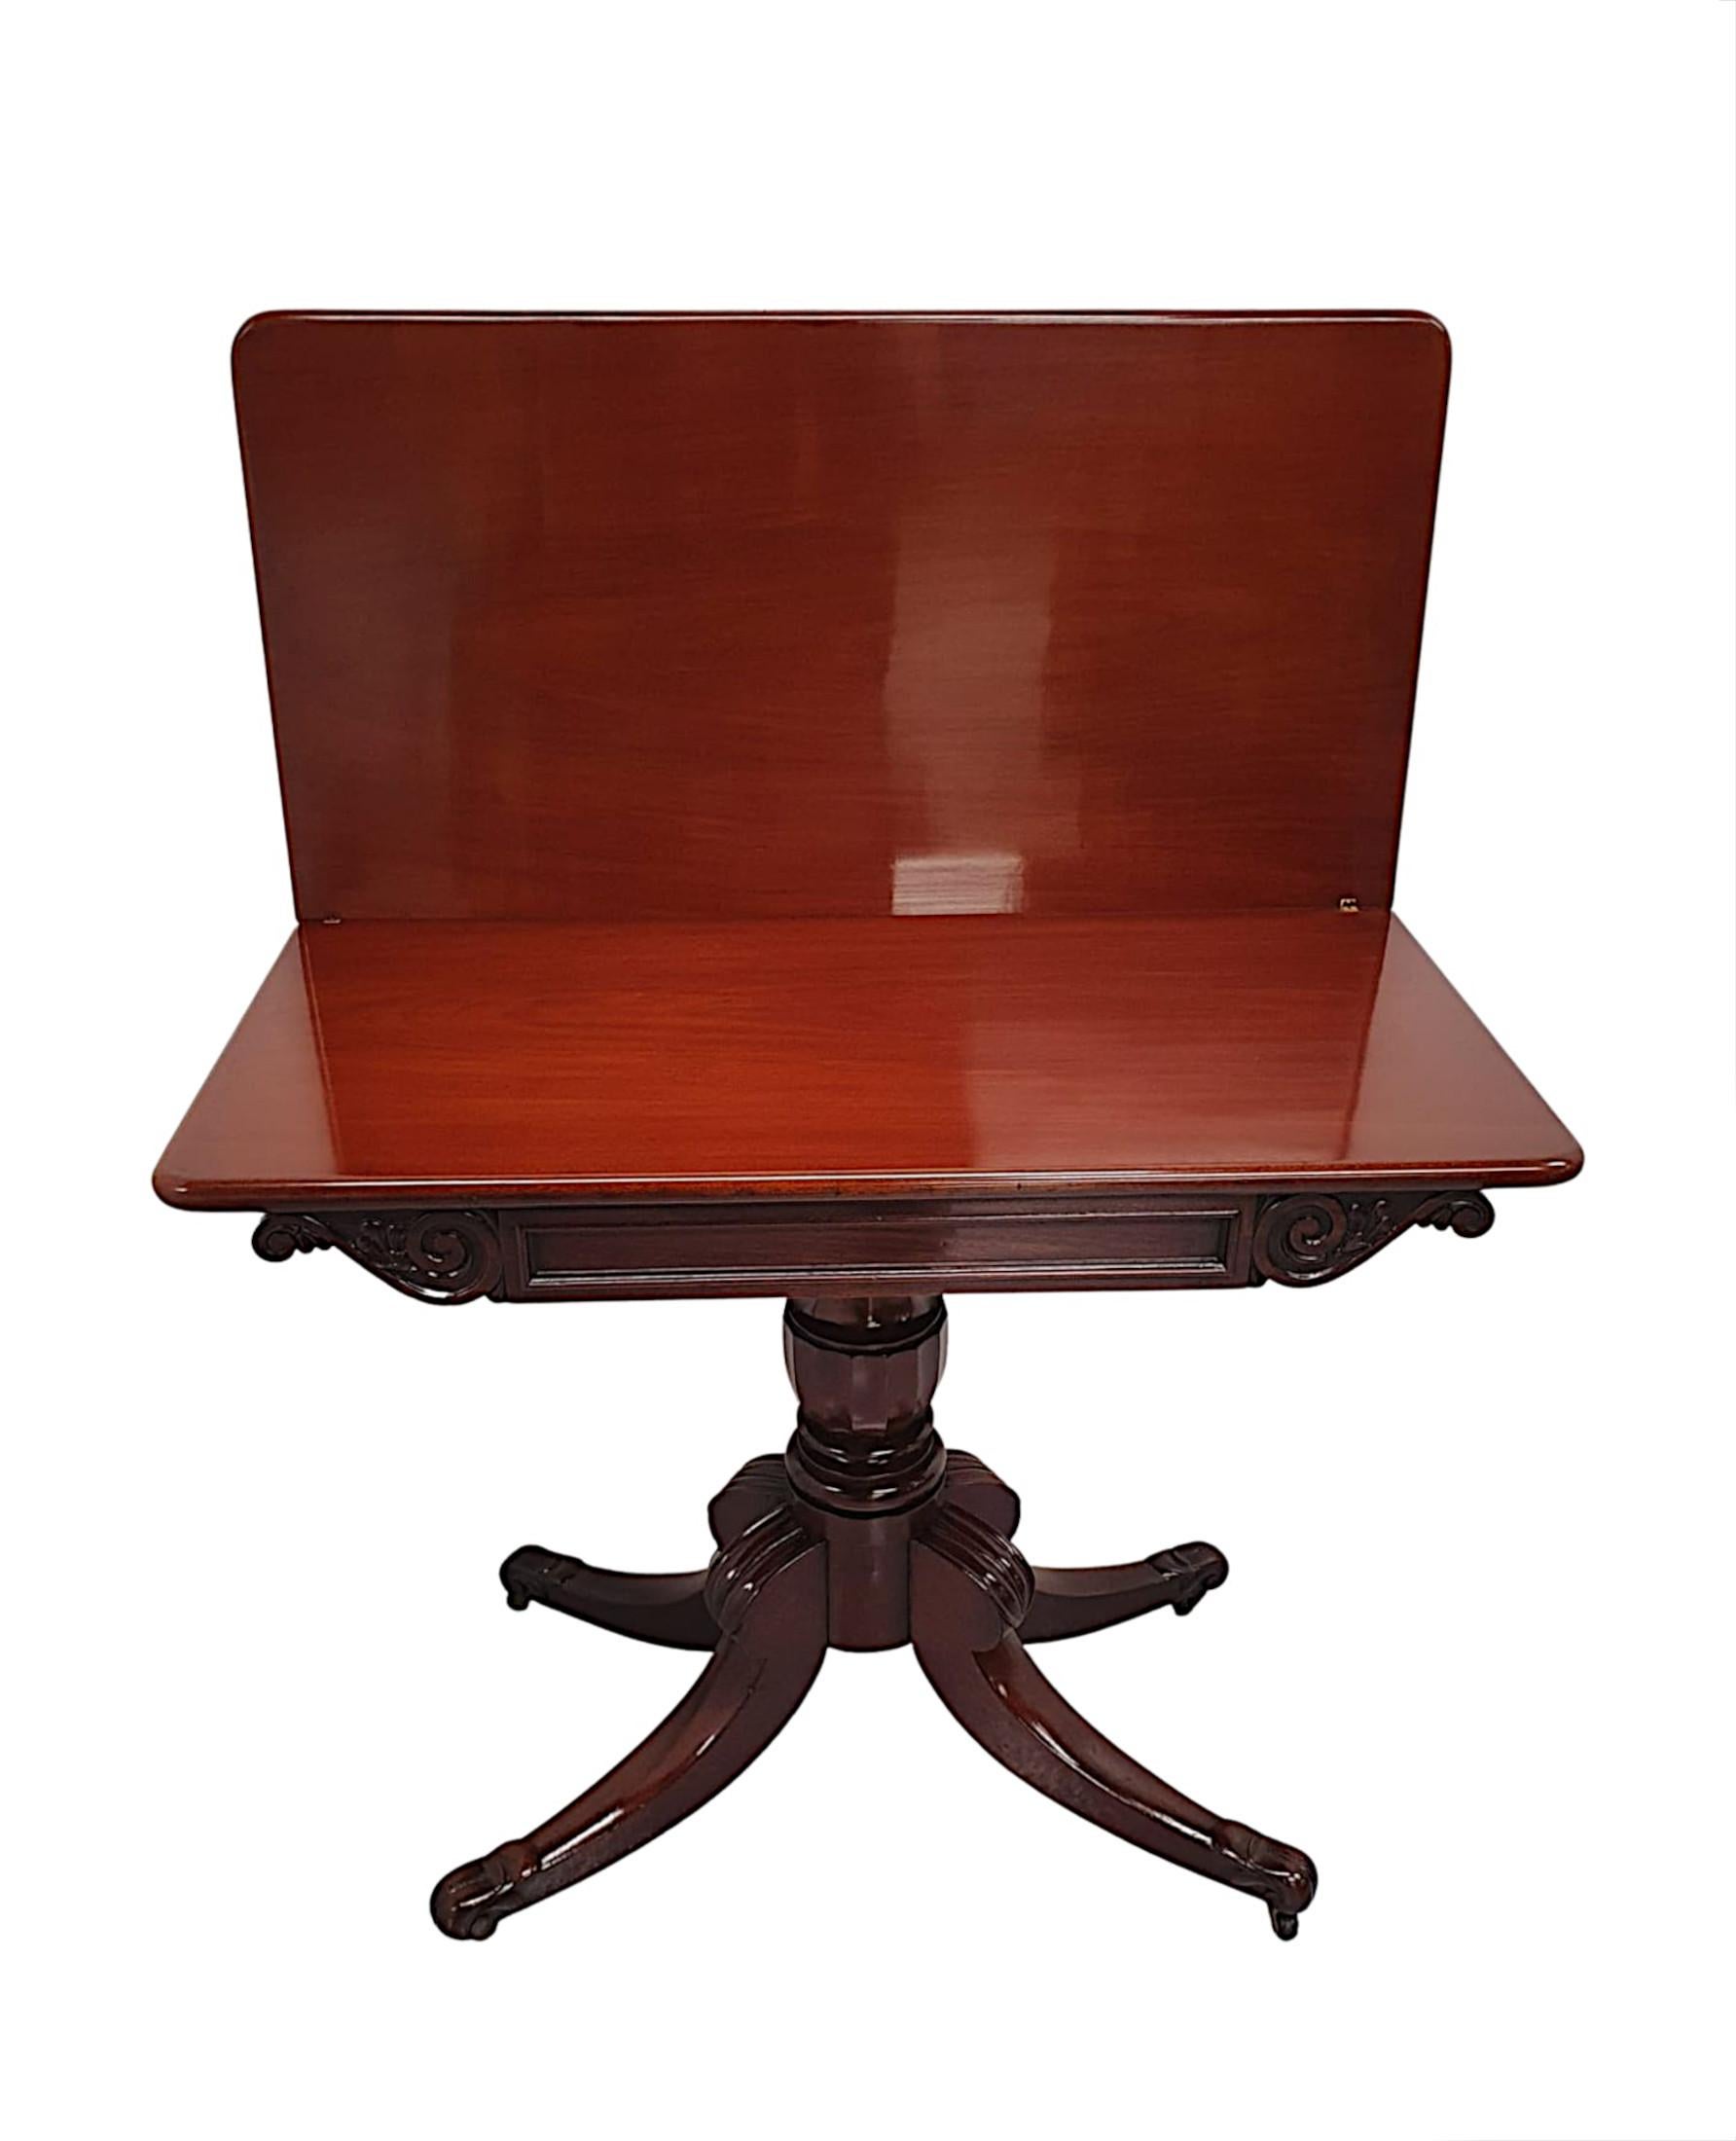 A fabulous early 19th Century Irish Regency mahogany turn over leaf tea  table, finely hand carved and of exceptional quality with rich patination and grain.  The well figured, moulded hinged top of rectangular form is crossbanded with rosewood and